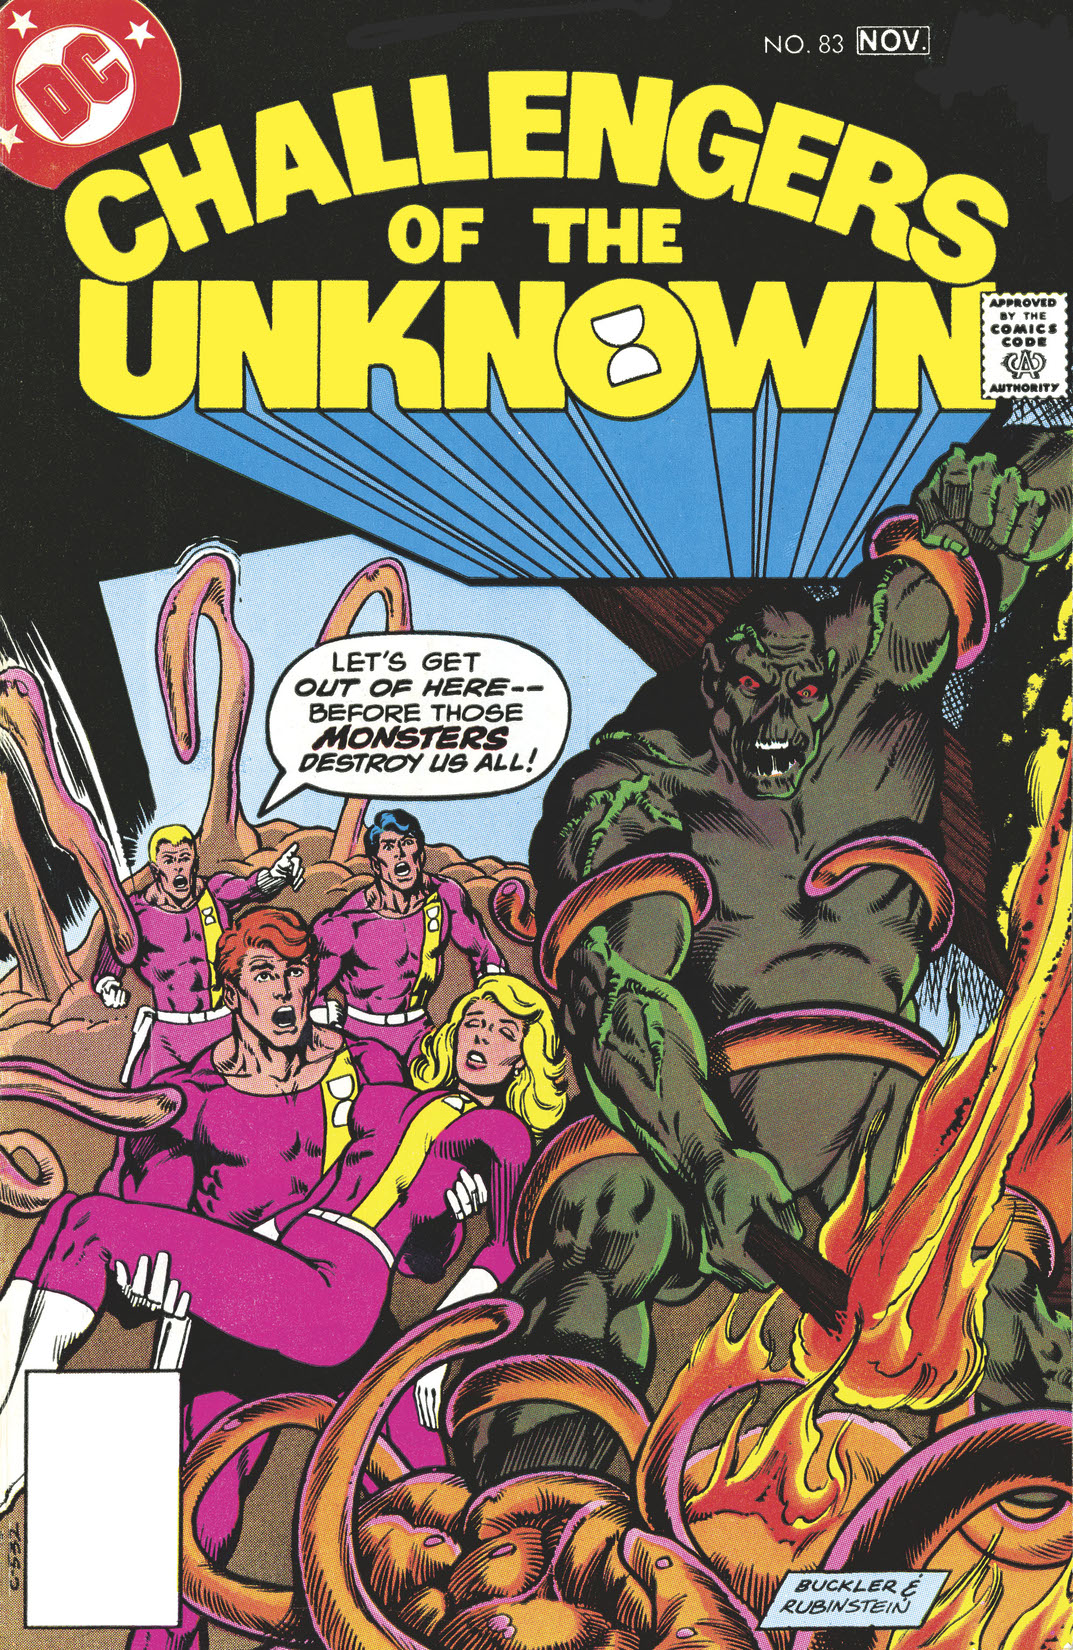 Challengers of the Unknown (1958-) #83 preview images